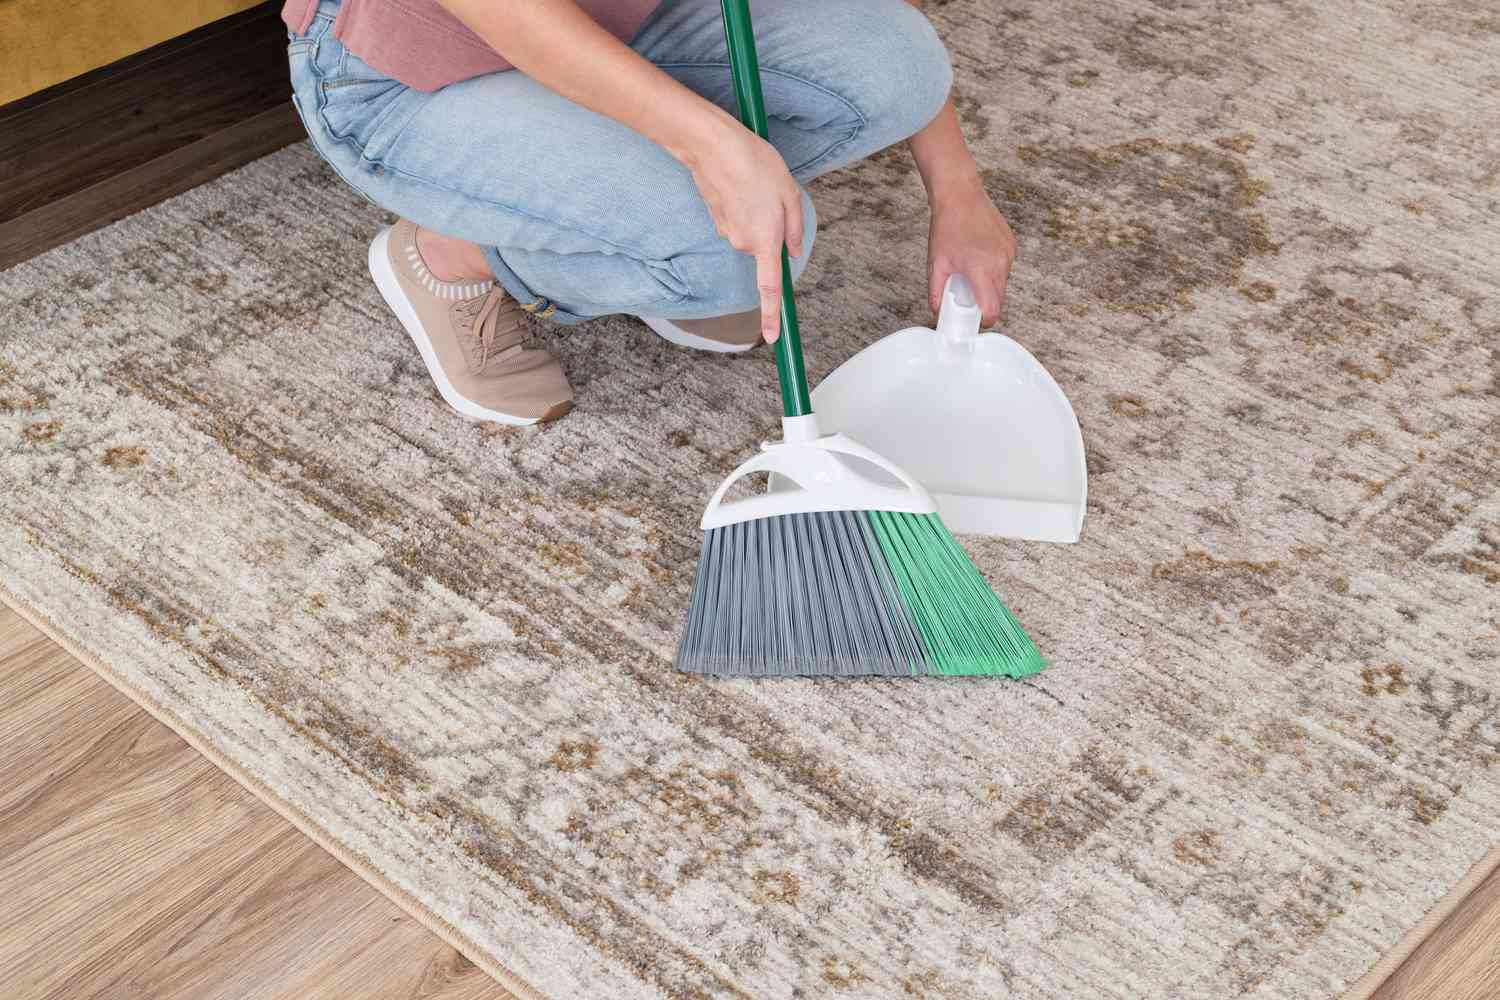 Person using a broom and dustpan to clean and area rug mess